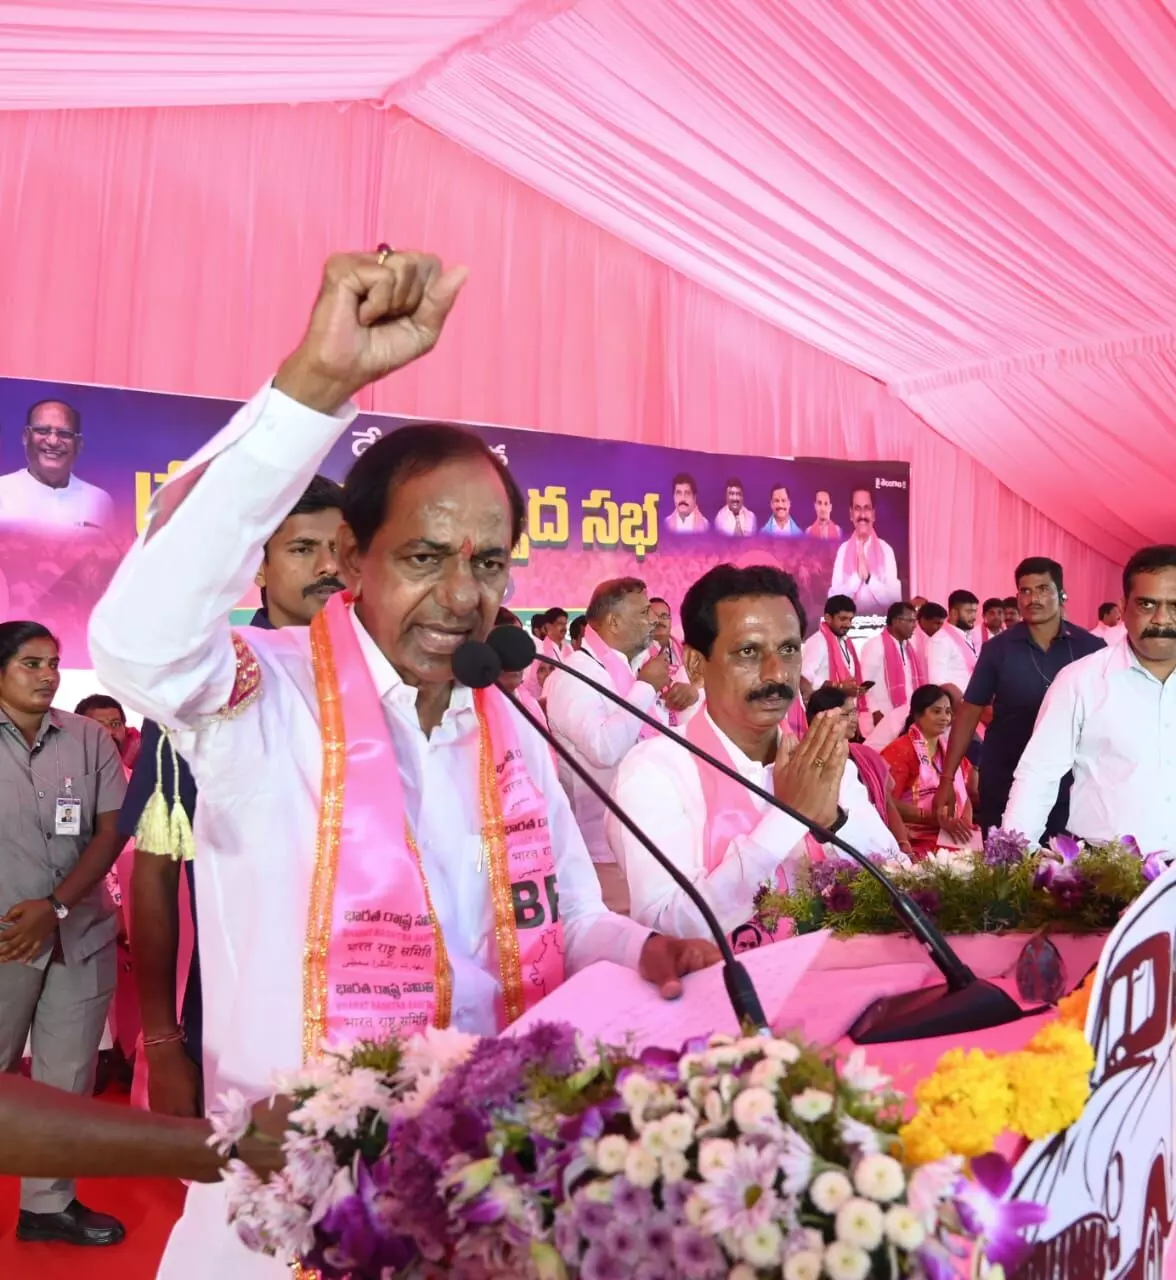 Congress failed to uplift Dalits despite being in power for years: KCR